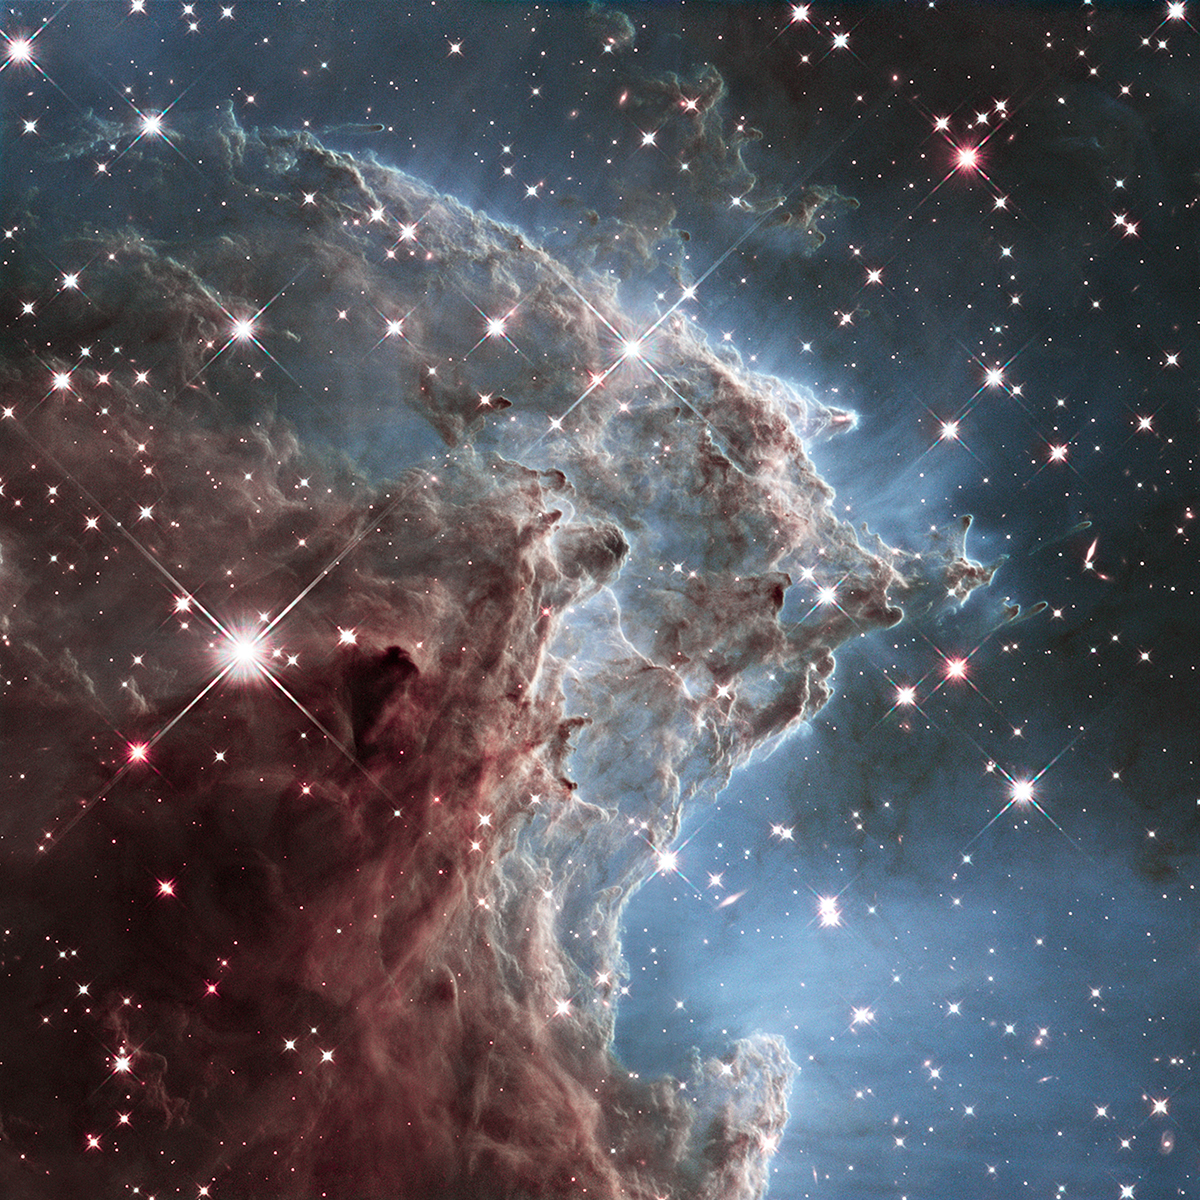 An infrared image of a small portion of the Monkey Head Nebula (also known as NGC 2174 and Sharpless Sh2-252) captured by the Hubble telescope, released on March 17, 2014.